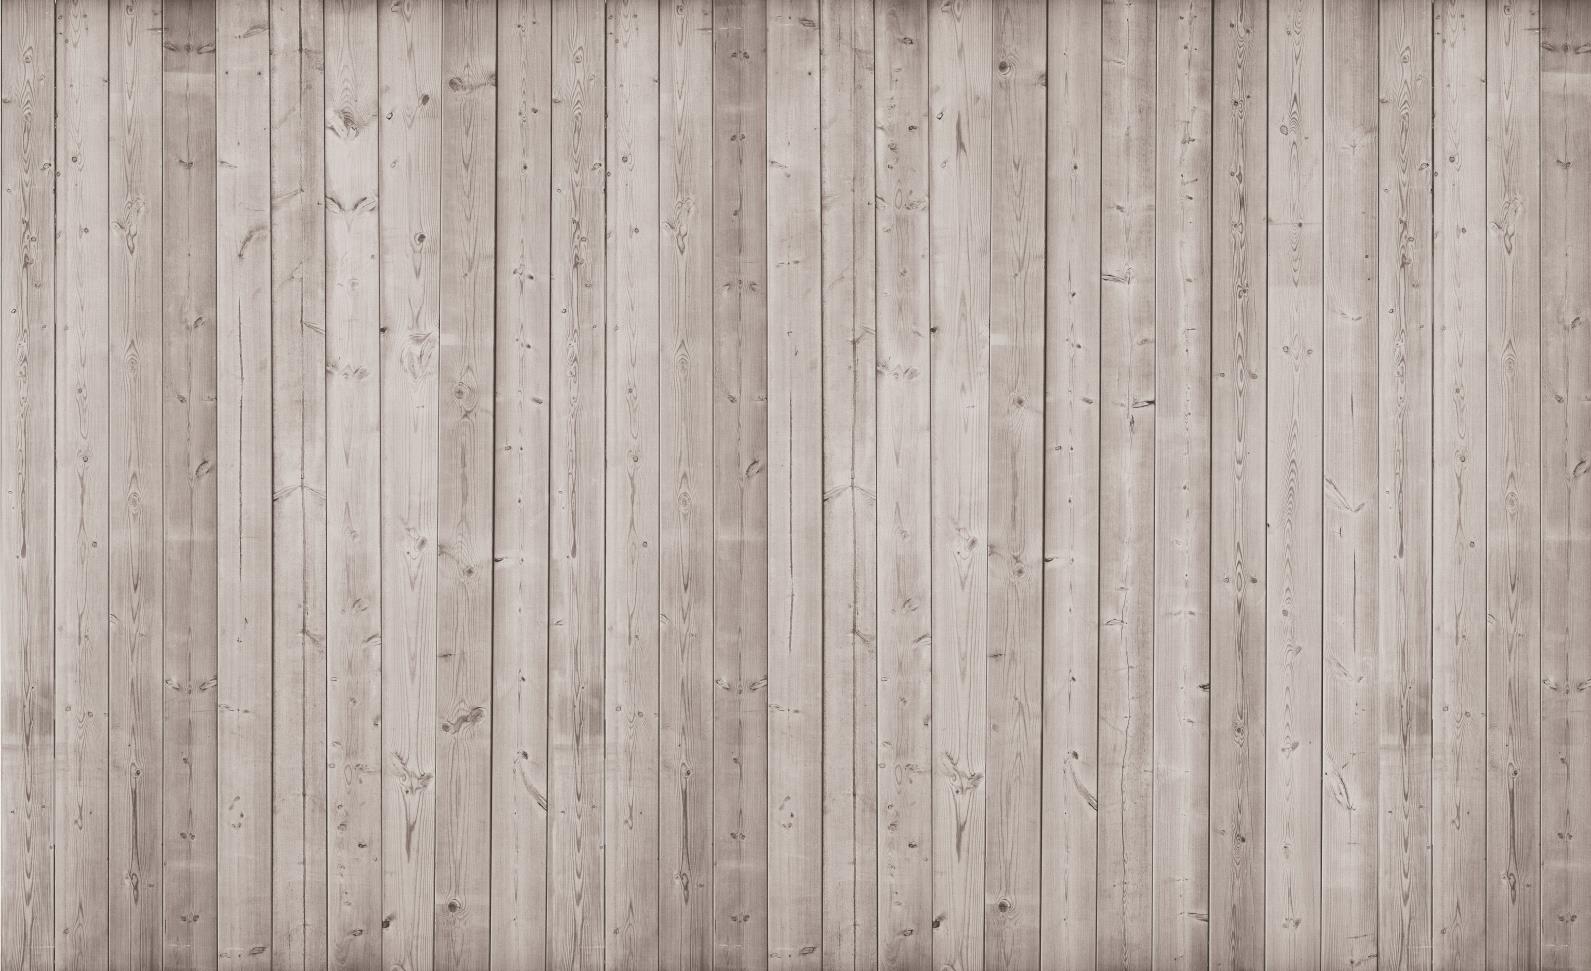 About Wood Planks Texture Photo Wallpaper Wall Mural Room Decor 1096p